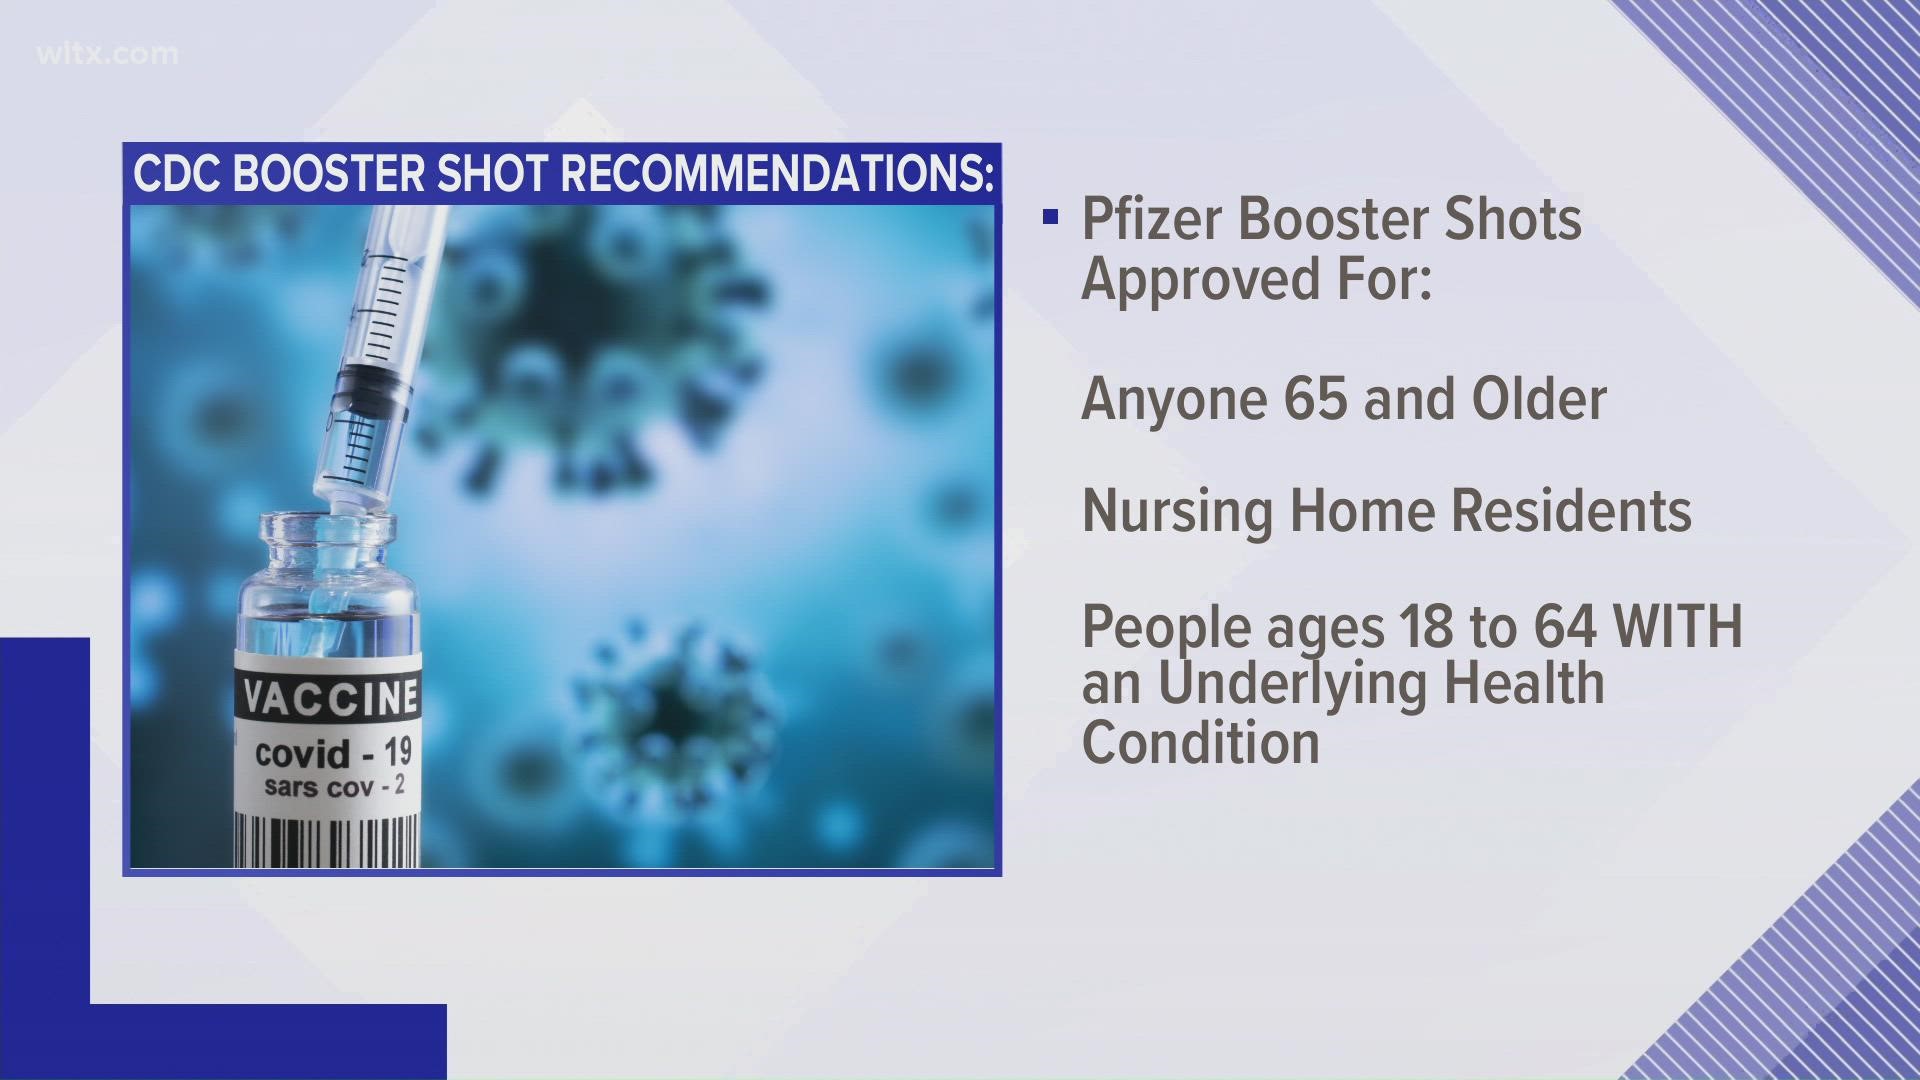 Advisers to the CDC said boosters should be offered to people 65 and older, nursing home residents and those ages 50 to 64 who have risky underlying health problems.